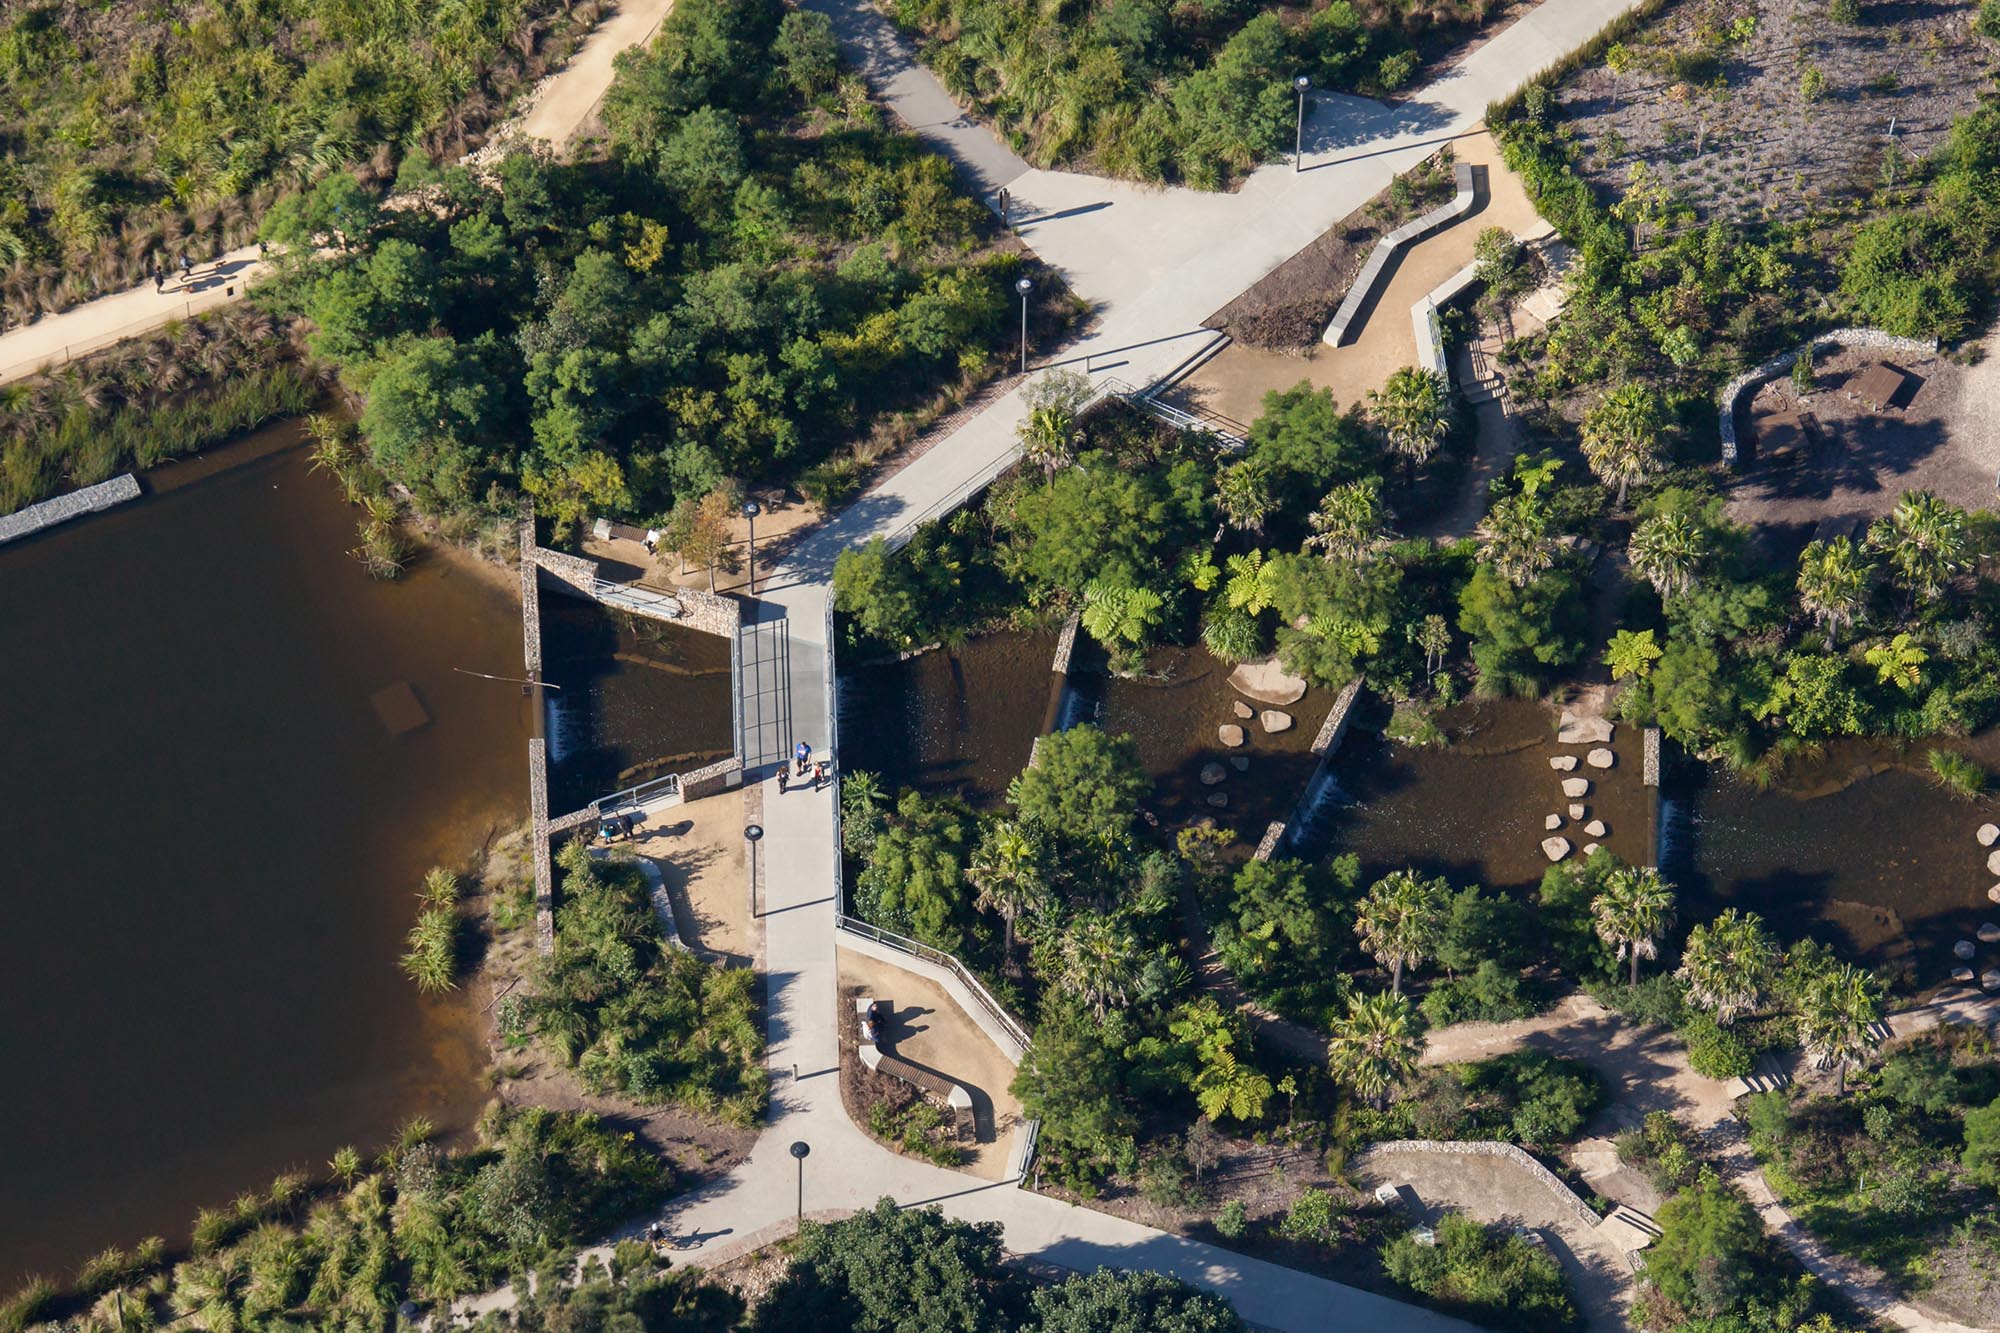 architecture water resilience climate change Sydney Park Water Re-Use Project by Turf Design Studio, Sydney, Australia